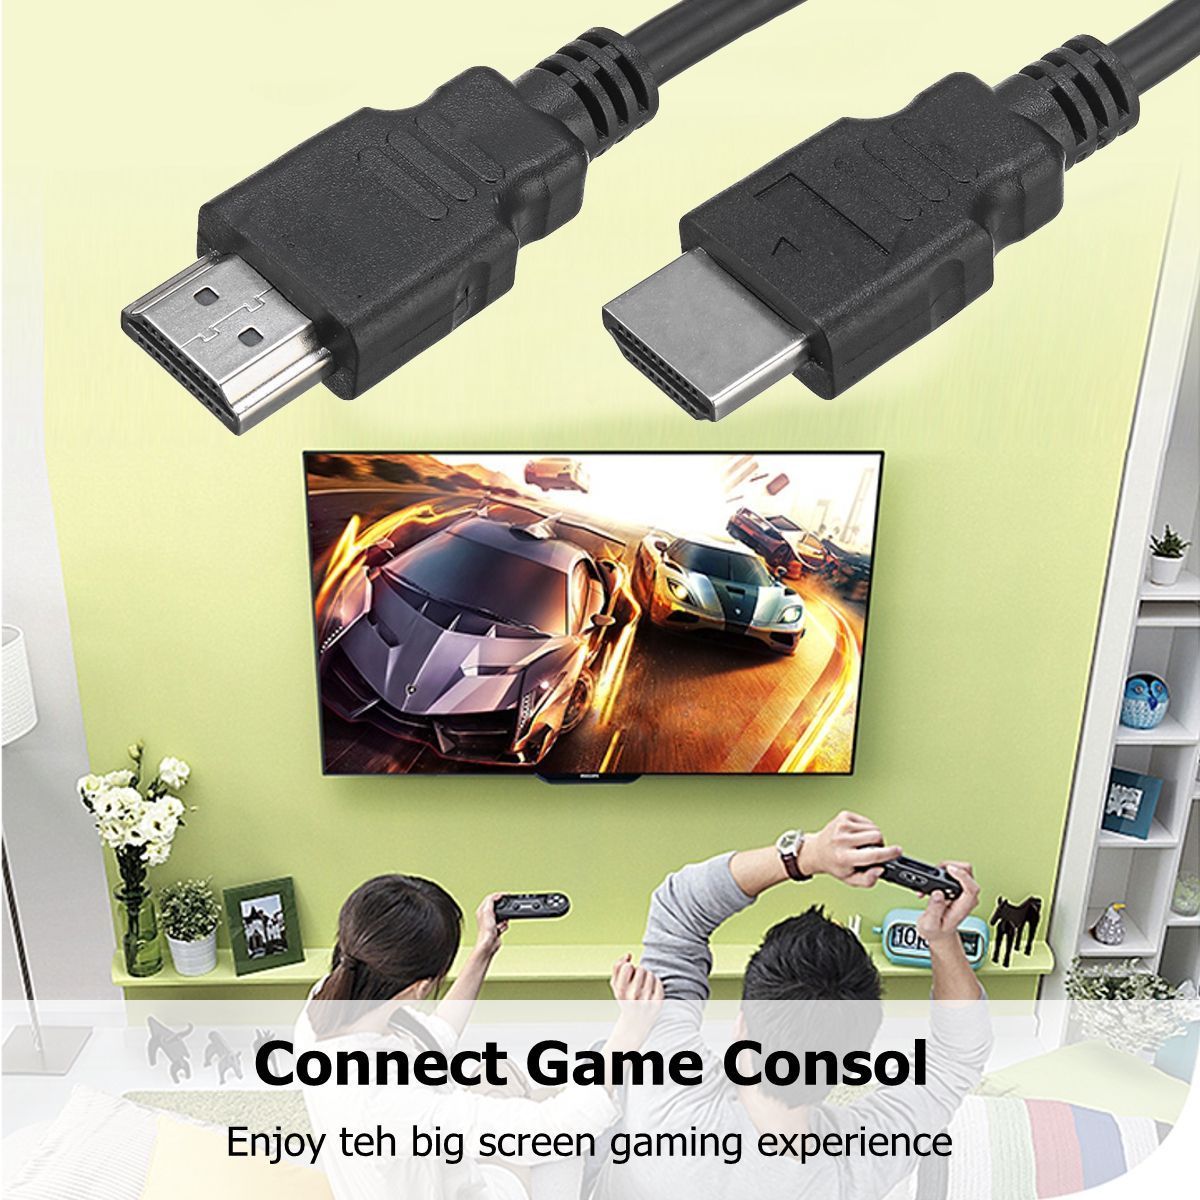 1M-High-Definition-Multimedia-14mm-Audio-Cable-for-Video-Game-Console-HD-TV-DVD-Players-DVR-1440470